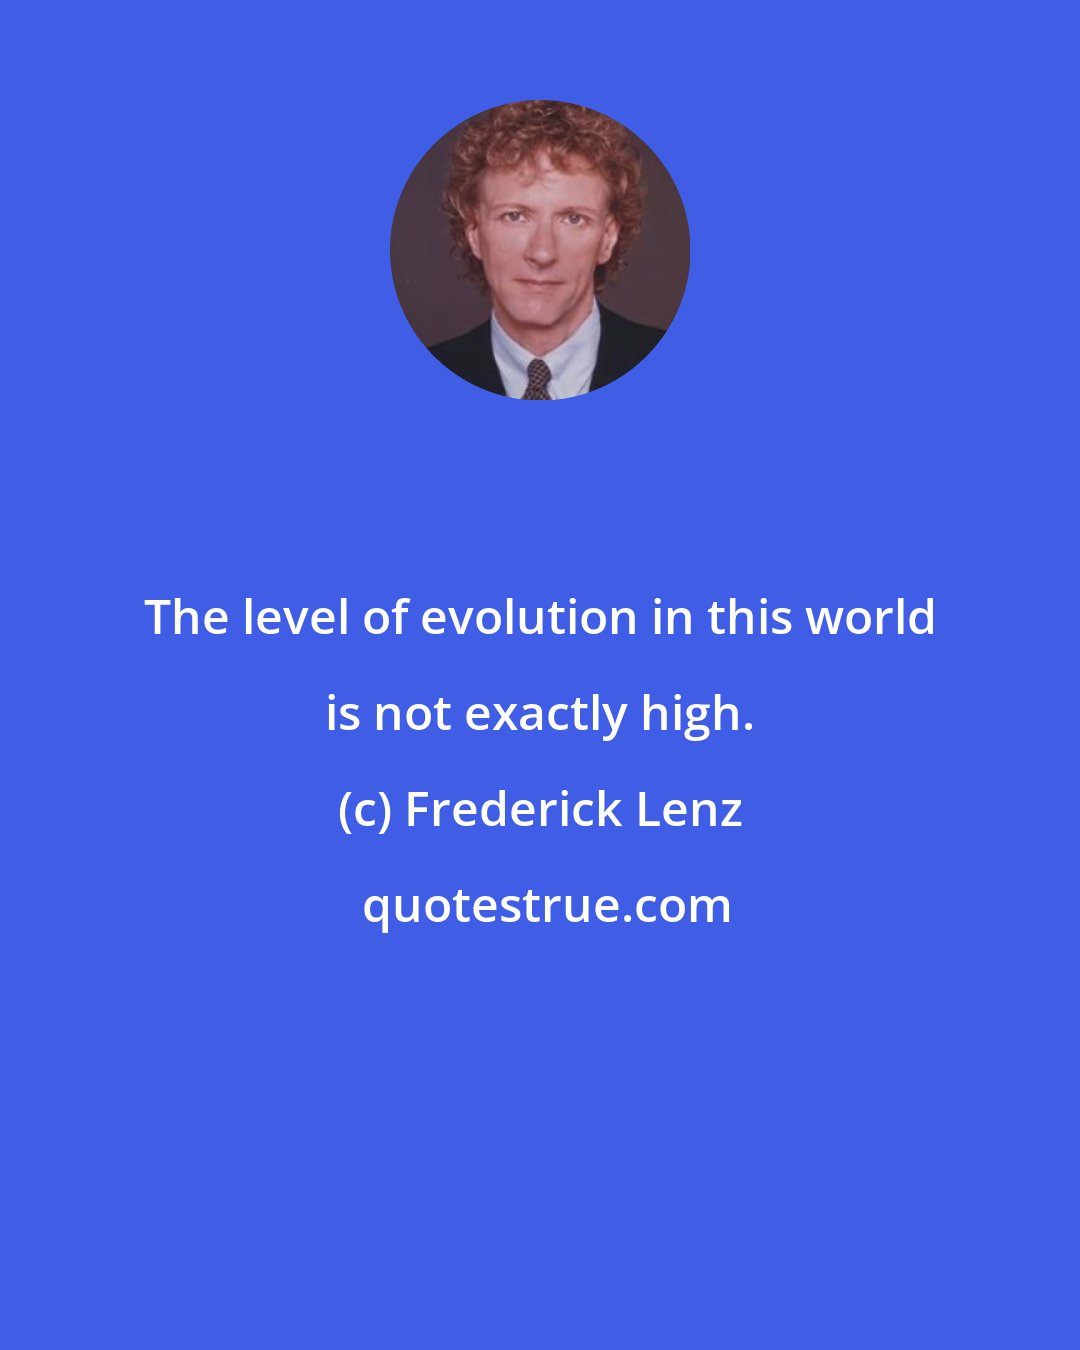 Frederick Lenz: The level of evolution in this world is not exactly high.